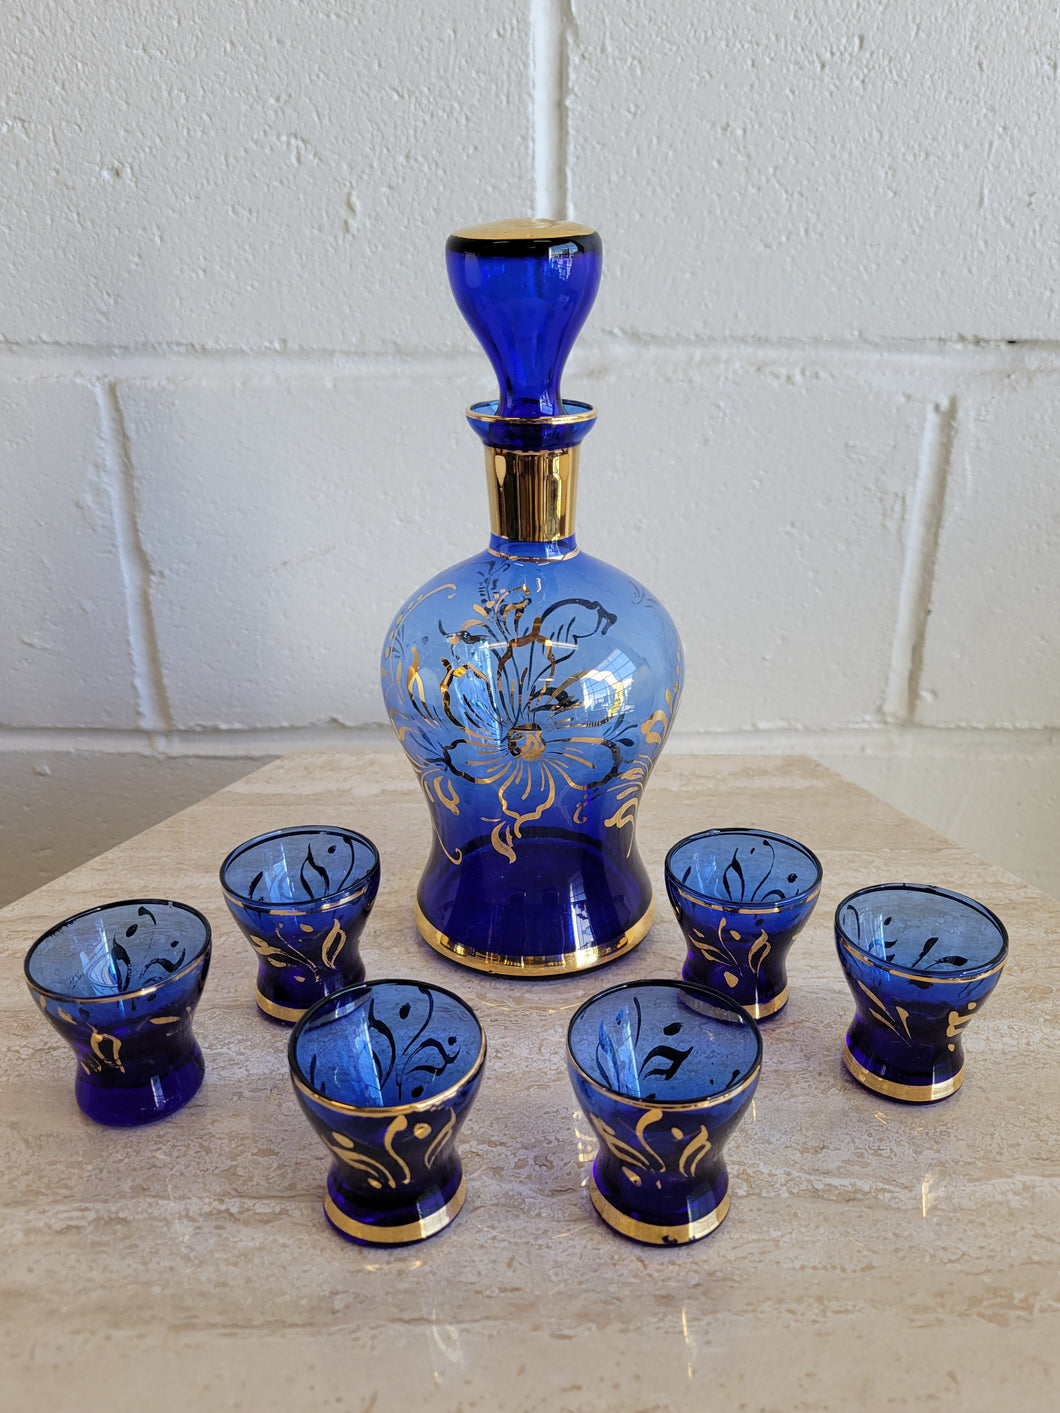 Vintage Czech Glass Decanter With 6 Shot Glasses